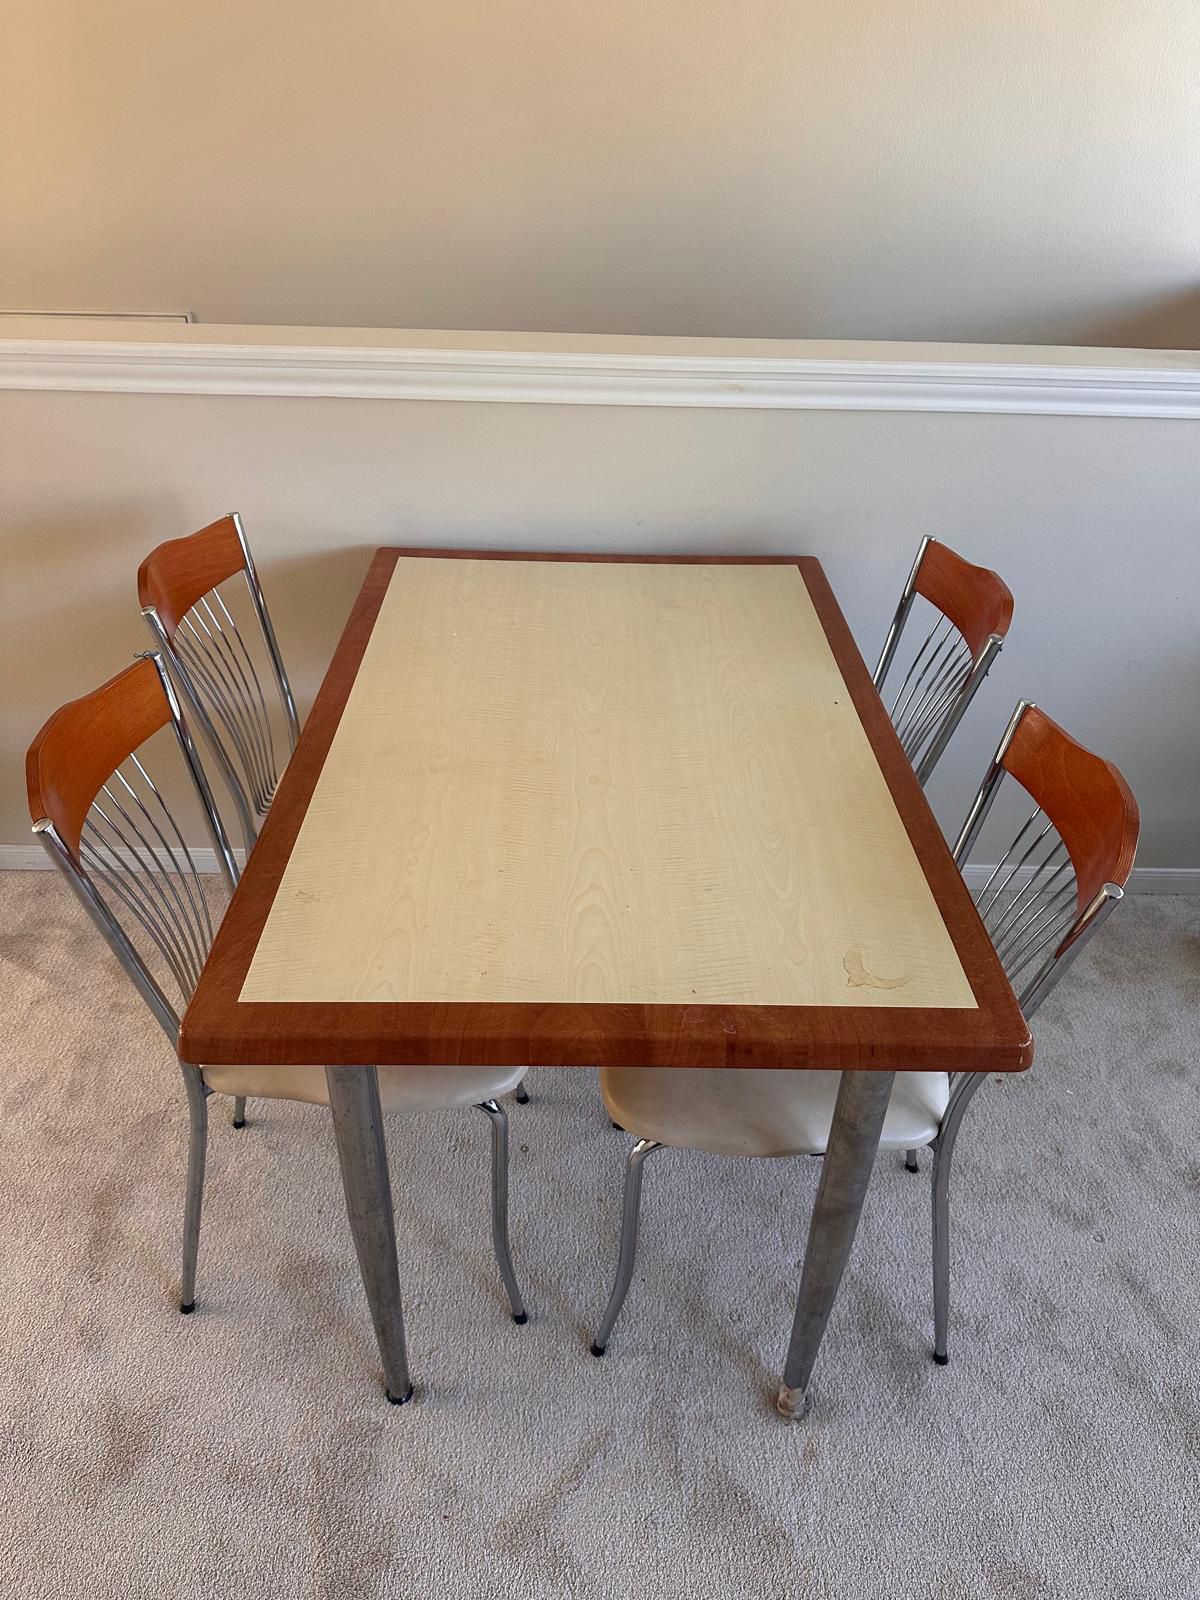 Kitchen Dining Table With 4 Chairs and For Up To 6 People. 